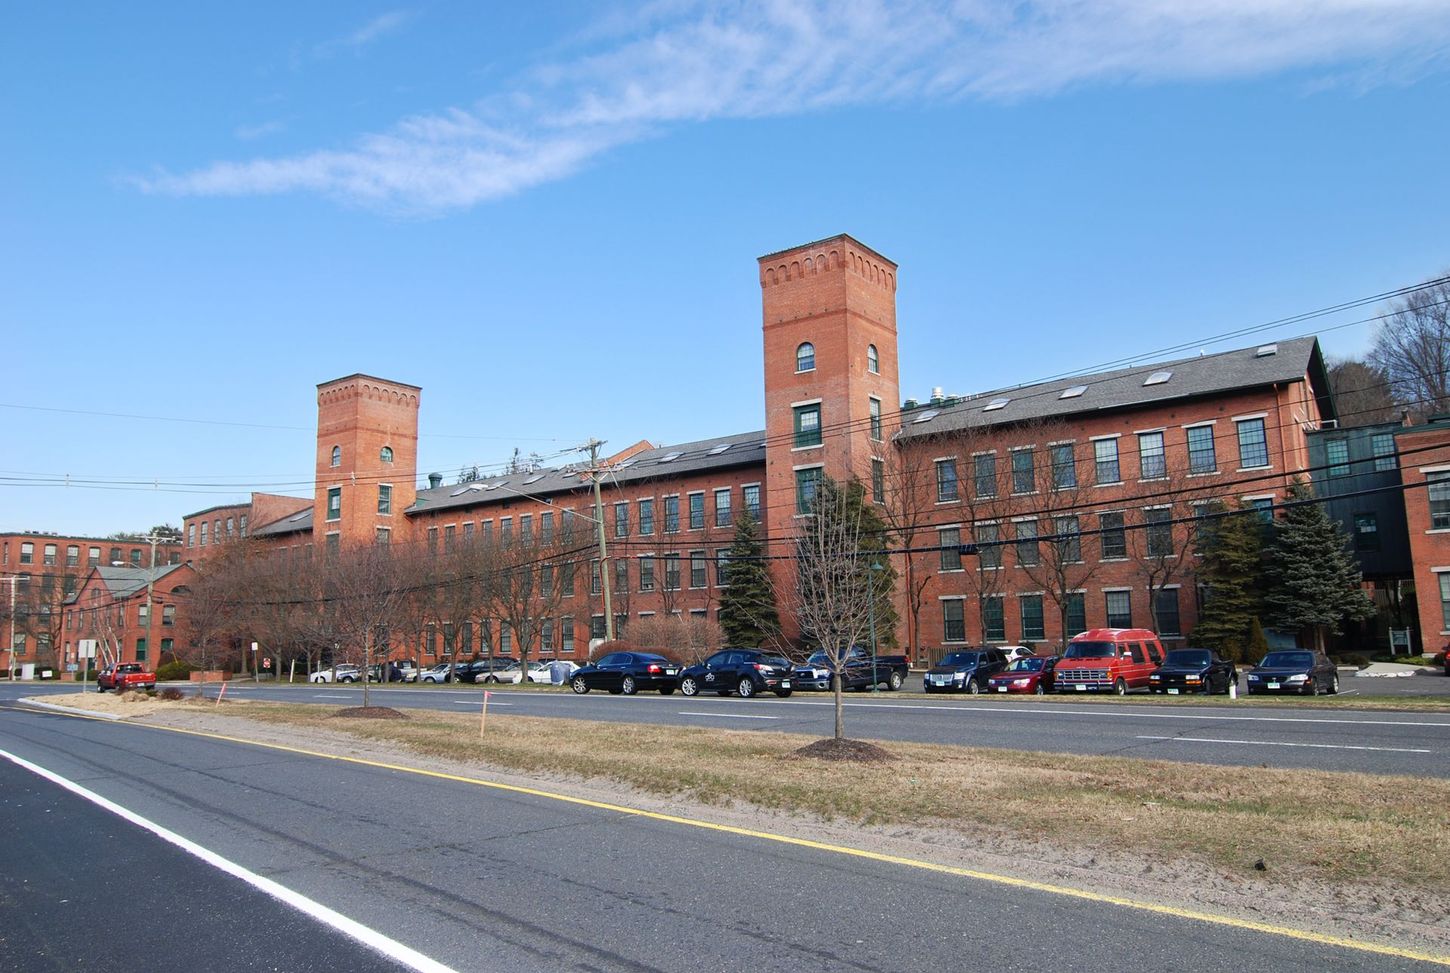 A large brick building with a lot of cars parked in front of it